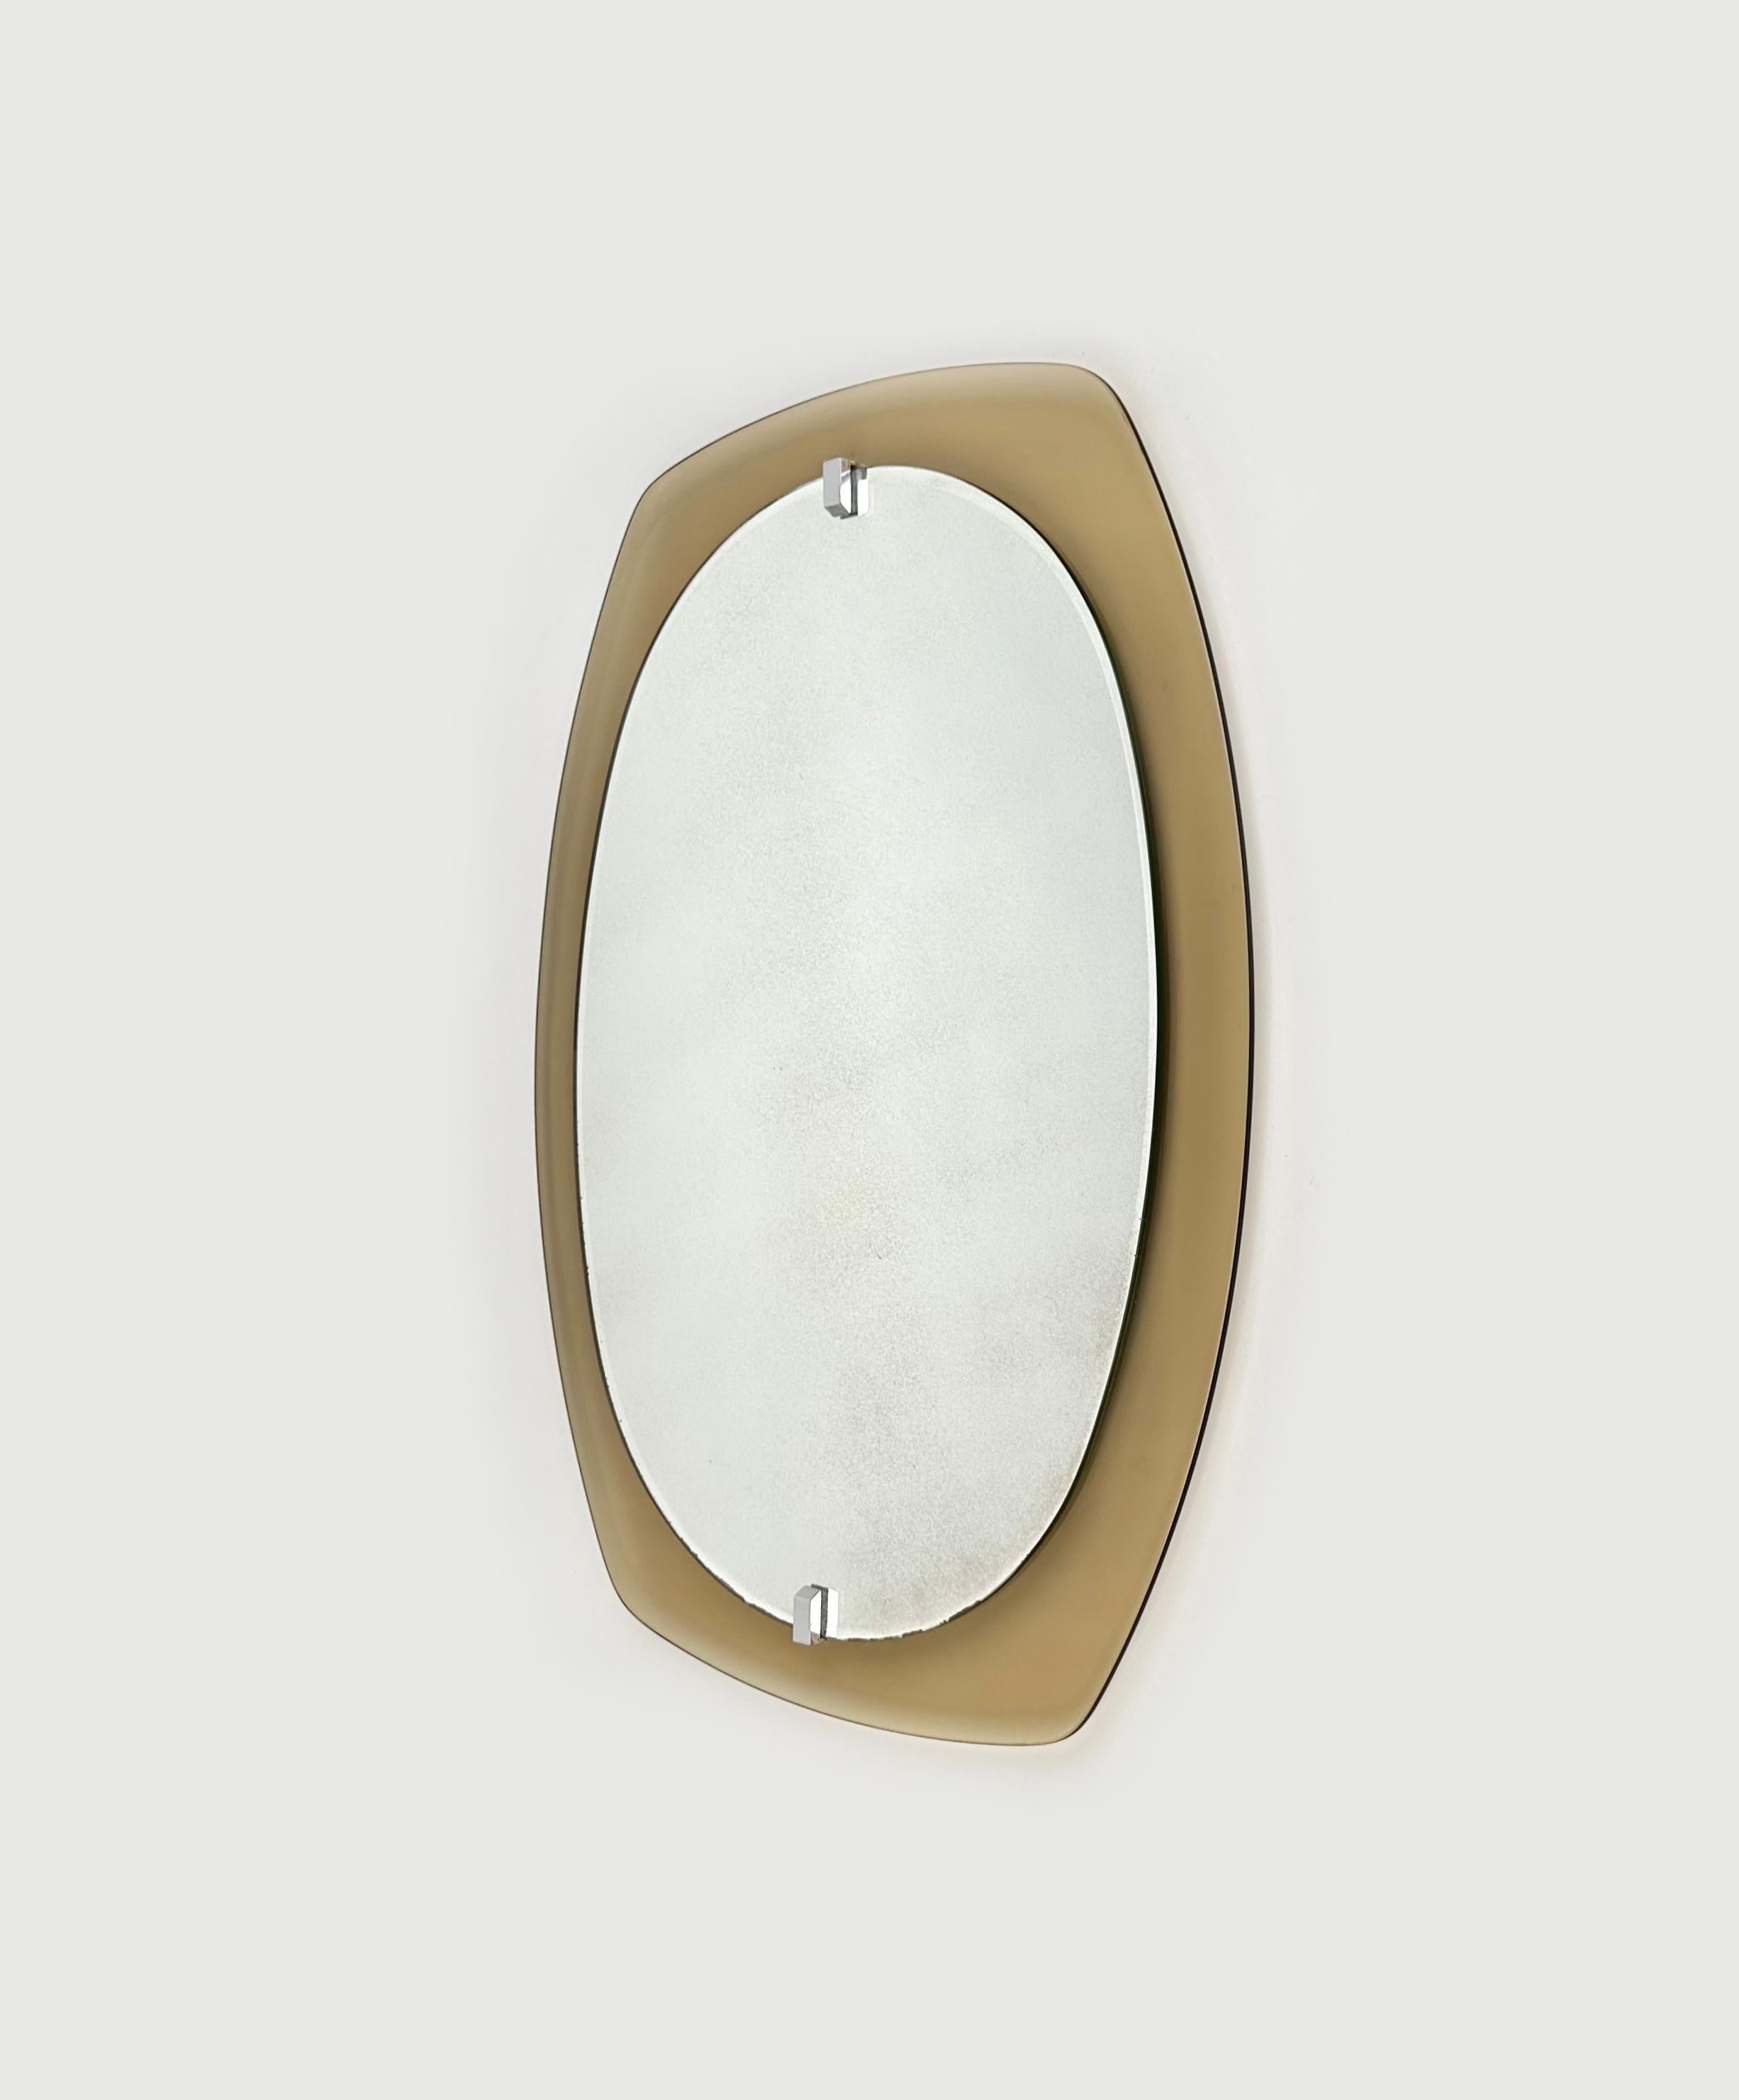 Late 20th Century Midcentury Wall Mirror Beveled Smoked Glass Frame by Veca, Italy 1970s For Sale